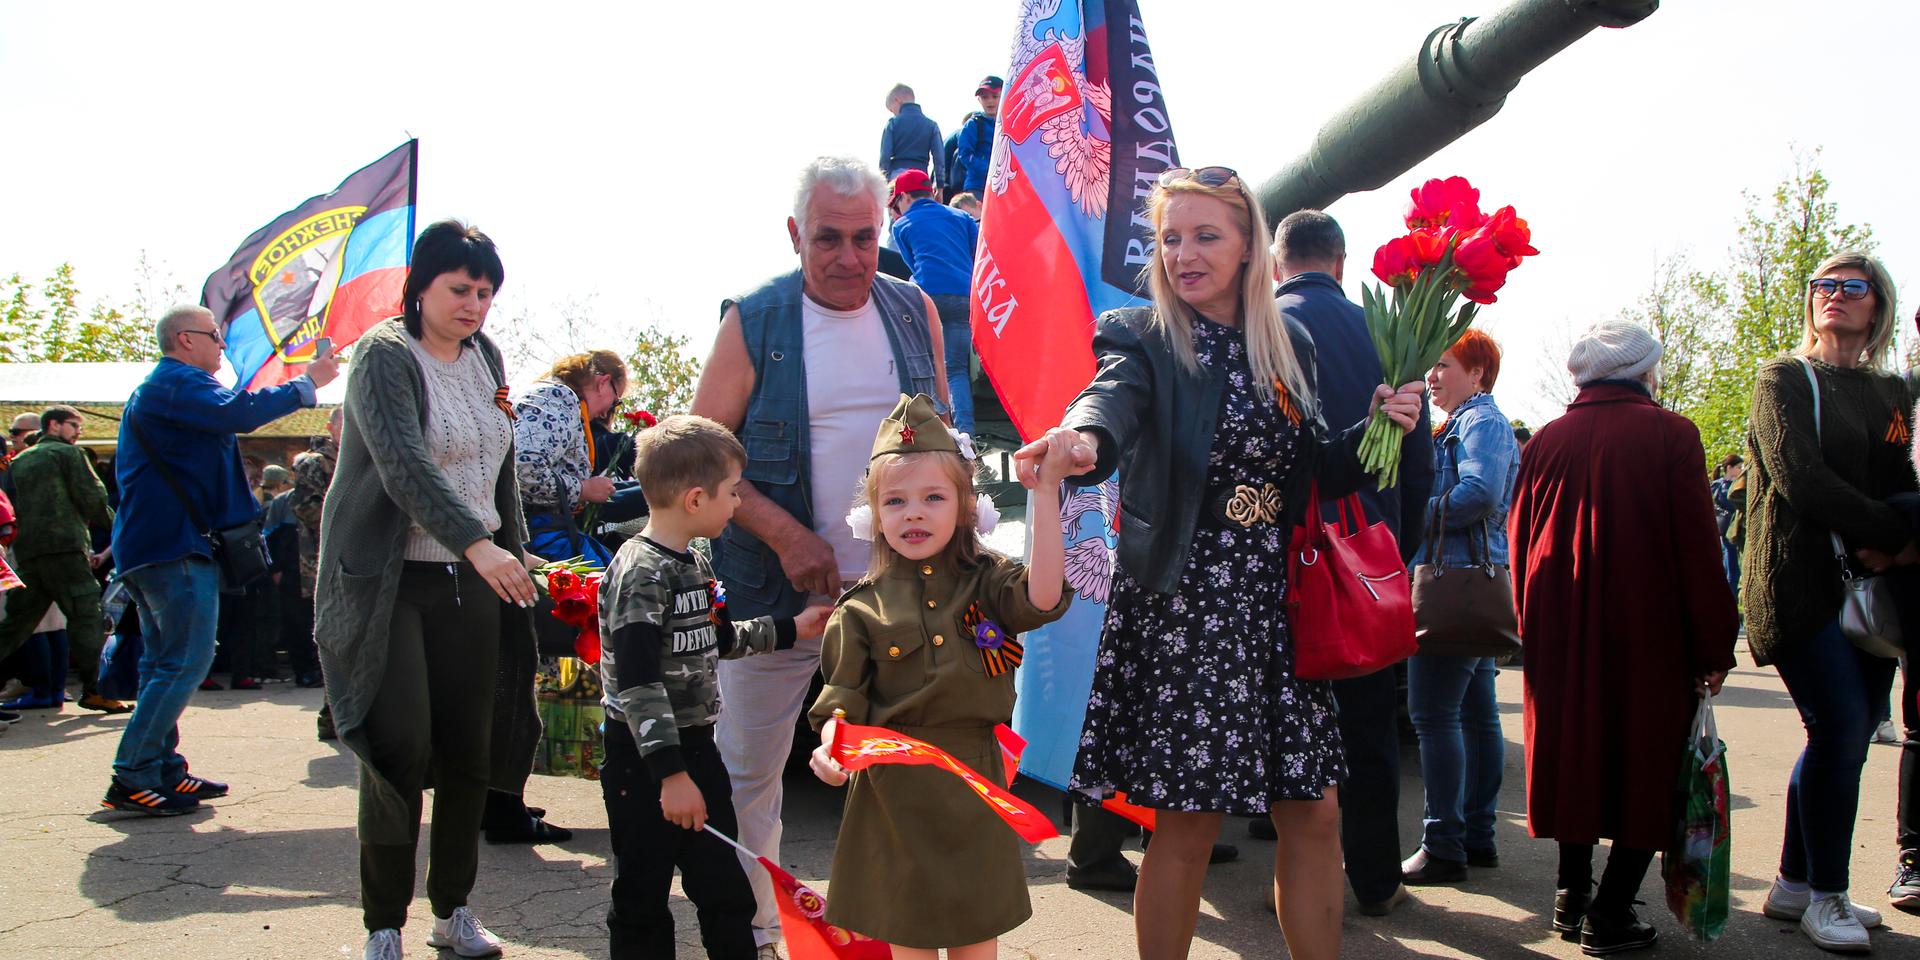 A girl wearing Soviet-era military uniform and her relative walks past a cannon during celebrations of the Victory Day at a World War II memorial in Saur-Mogila, about 60 km (31 miles) east of Donetsk, eastern Ukraine, Saturday, May 8, 2021. Efforts have stalled to end the conflict between Russia-backed rebels and Ukrainian forces, which has killed more than 14,000 people since it broke out in 2014. Russia, which claims it has no military presence in eastern Ukraine, fueled the tensions this year by massing troops and conducting large-scale military exercises near its border with Ukraine. (AP Photo/Alexei Alexandrov)  XAZ102